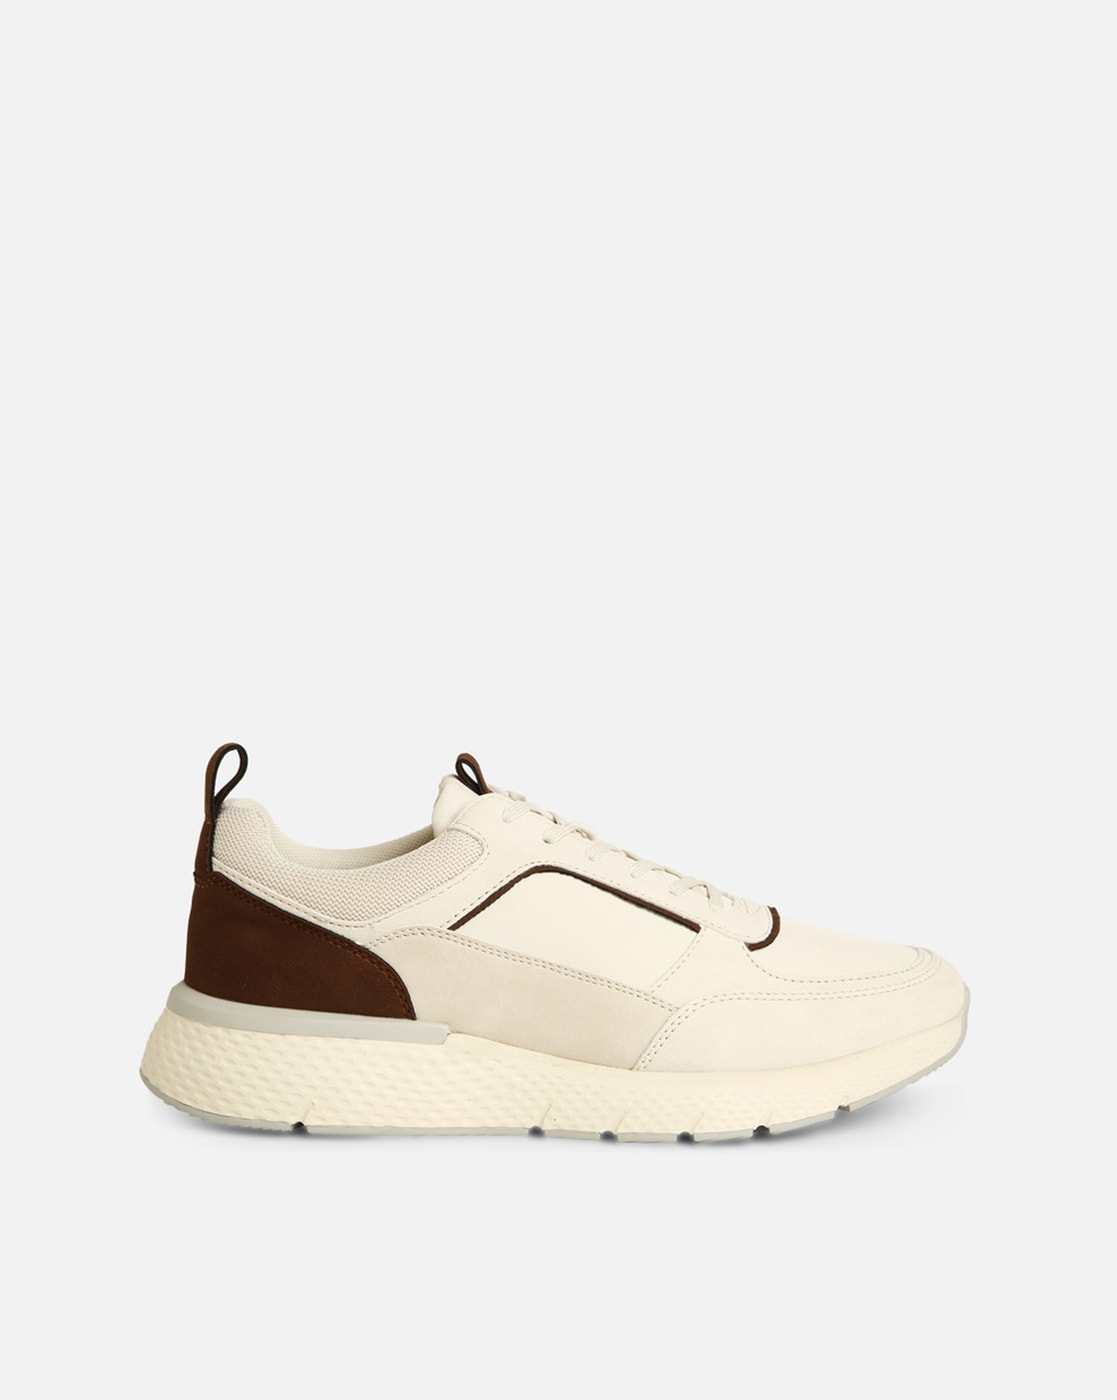 Details more than 116 off white sneakers latest